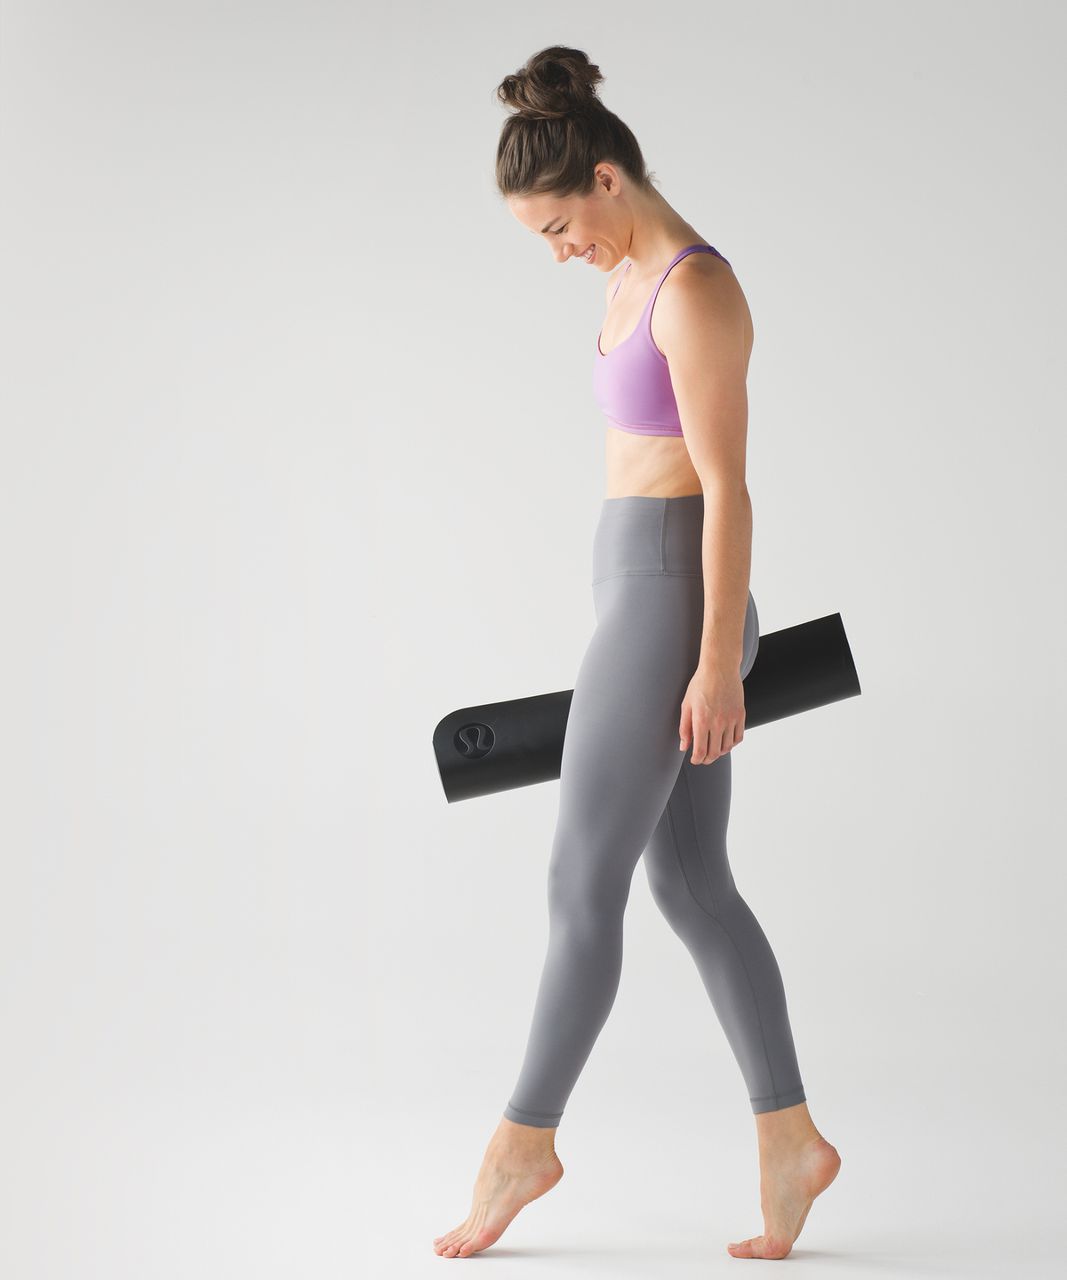 Lululemon Free To Be Bra - Rose Blush (First Release)